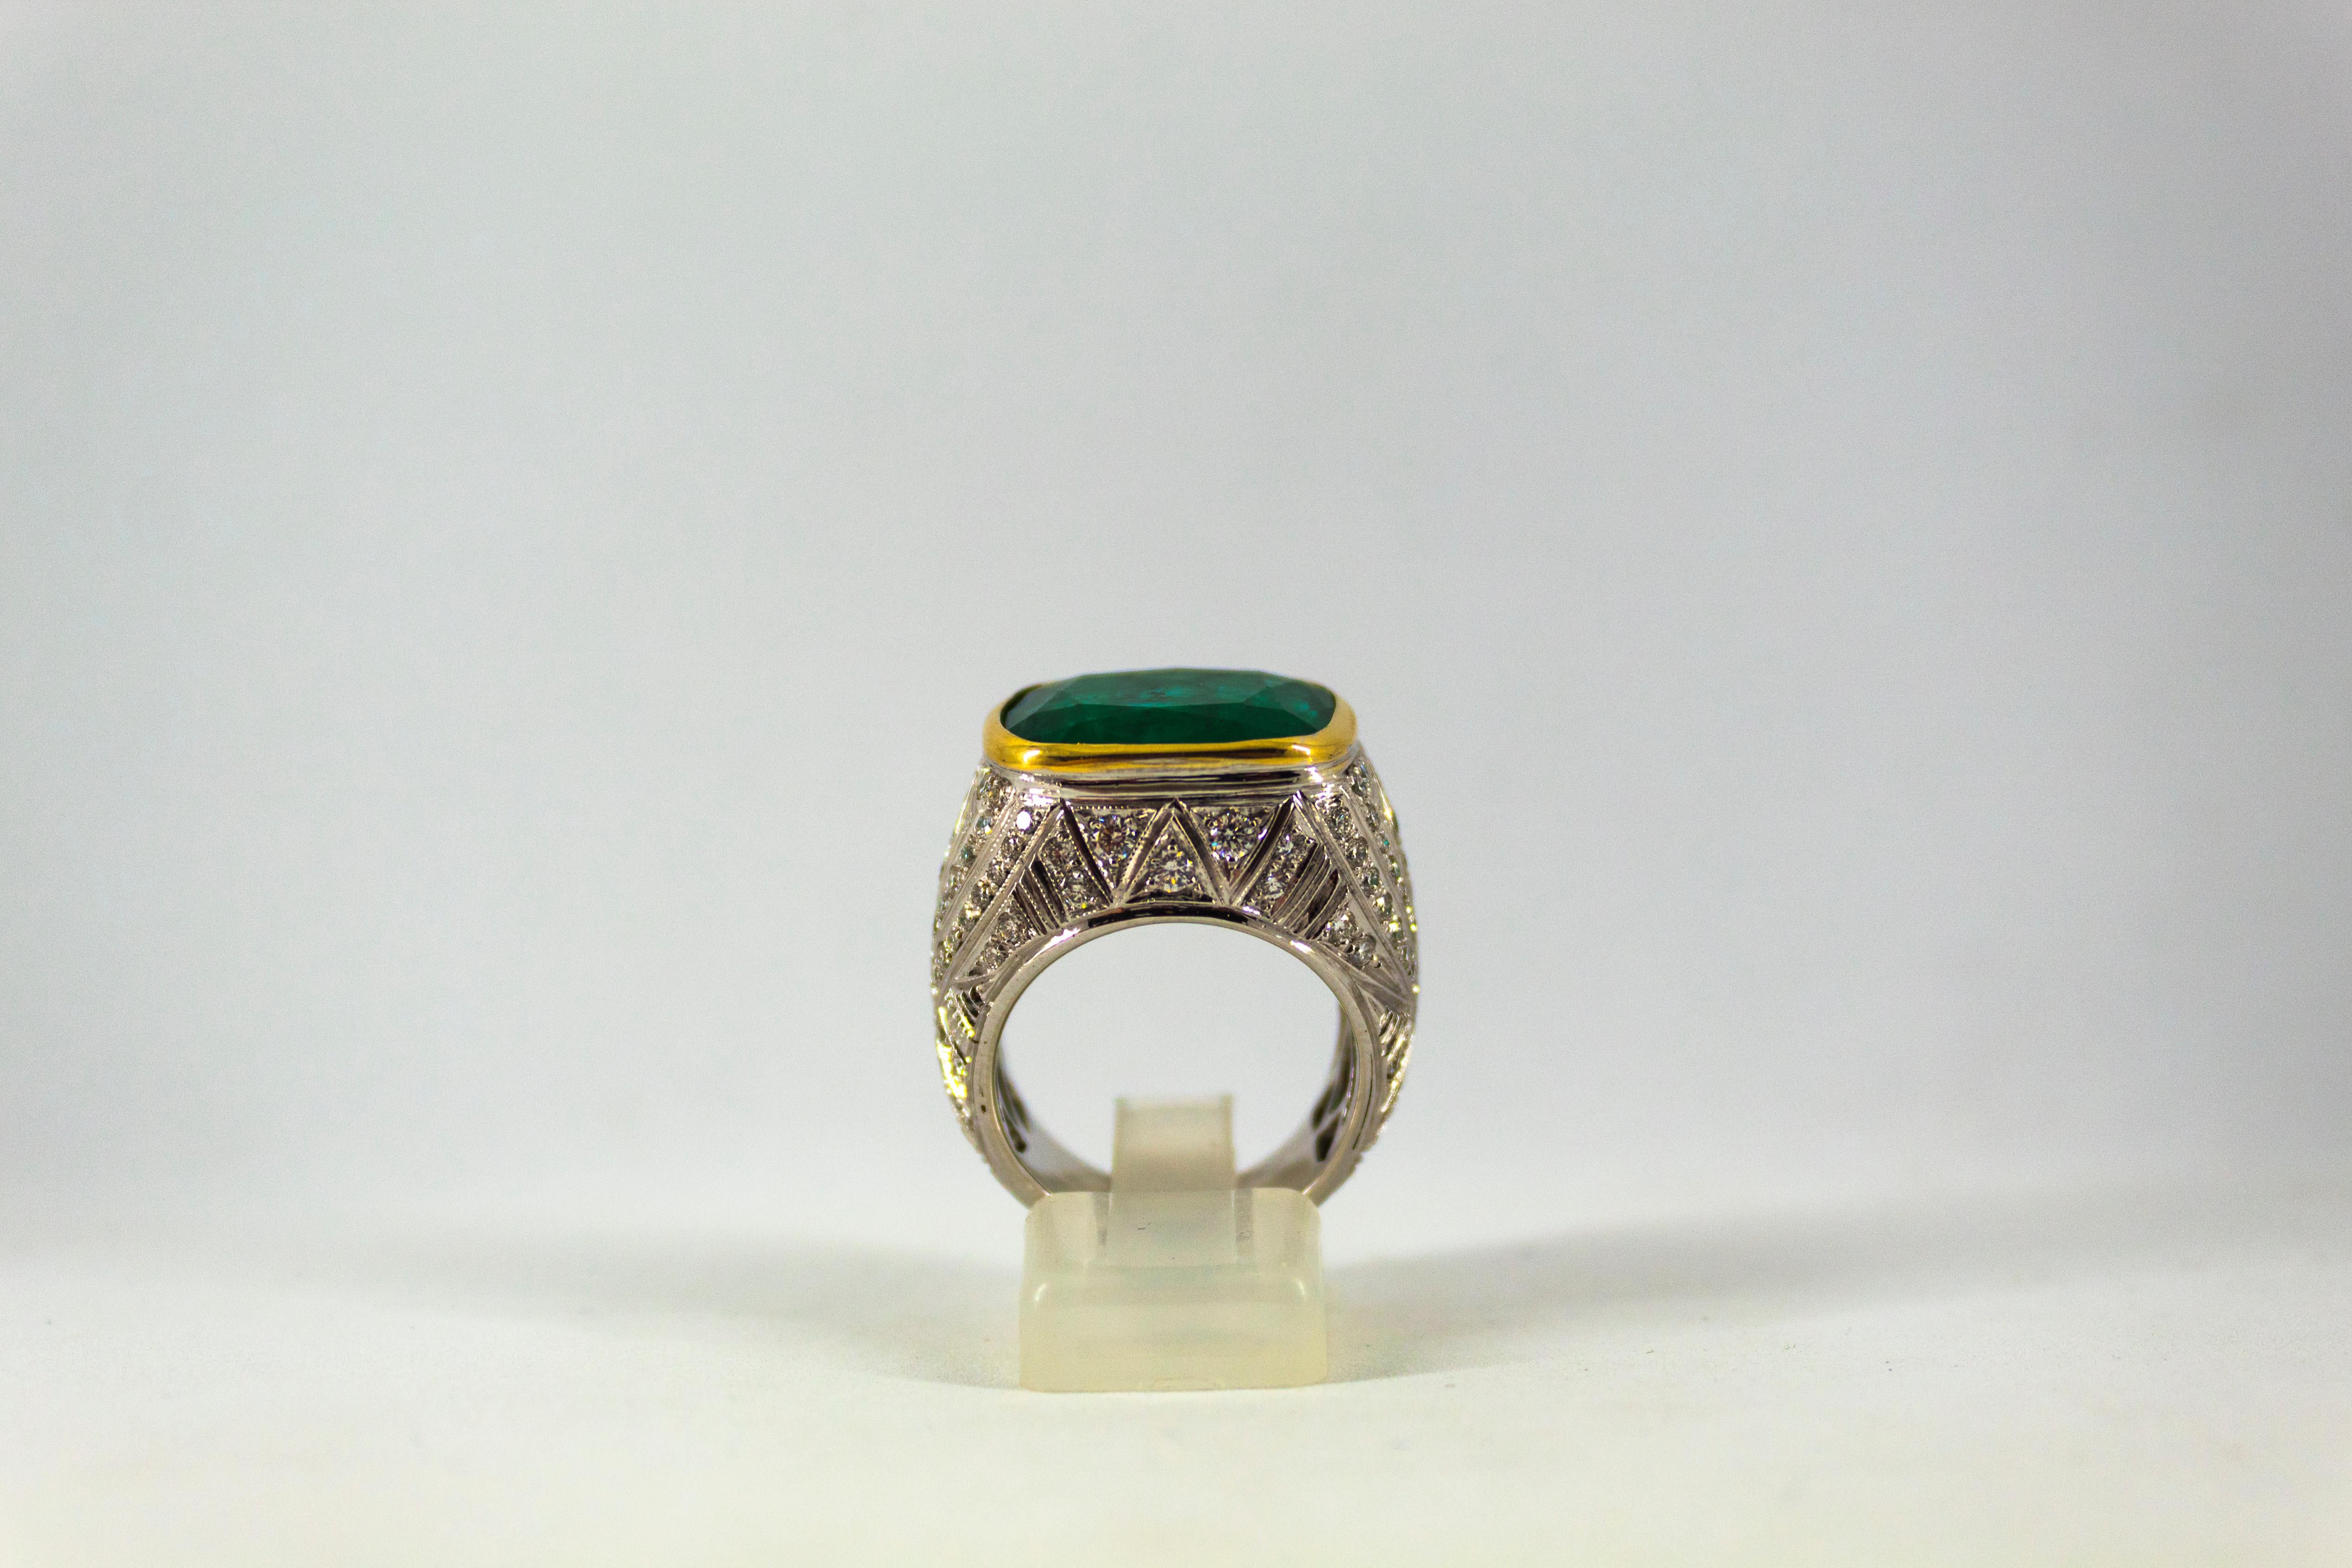 This Ring is made of 18K White Gold.
This Ring has 1.80 Carats of White Diamonds.
This Ring has a 18.04 Carats Zambia Emerald.
This Ring is inspired by Art Deco.
Size ITA: 15 USA: 7
We're a workshop so every piece is handmade, customizable and